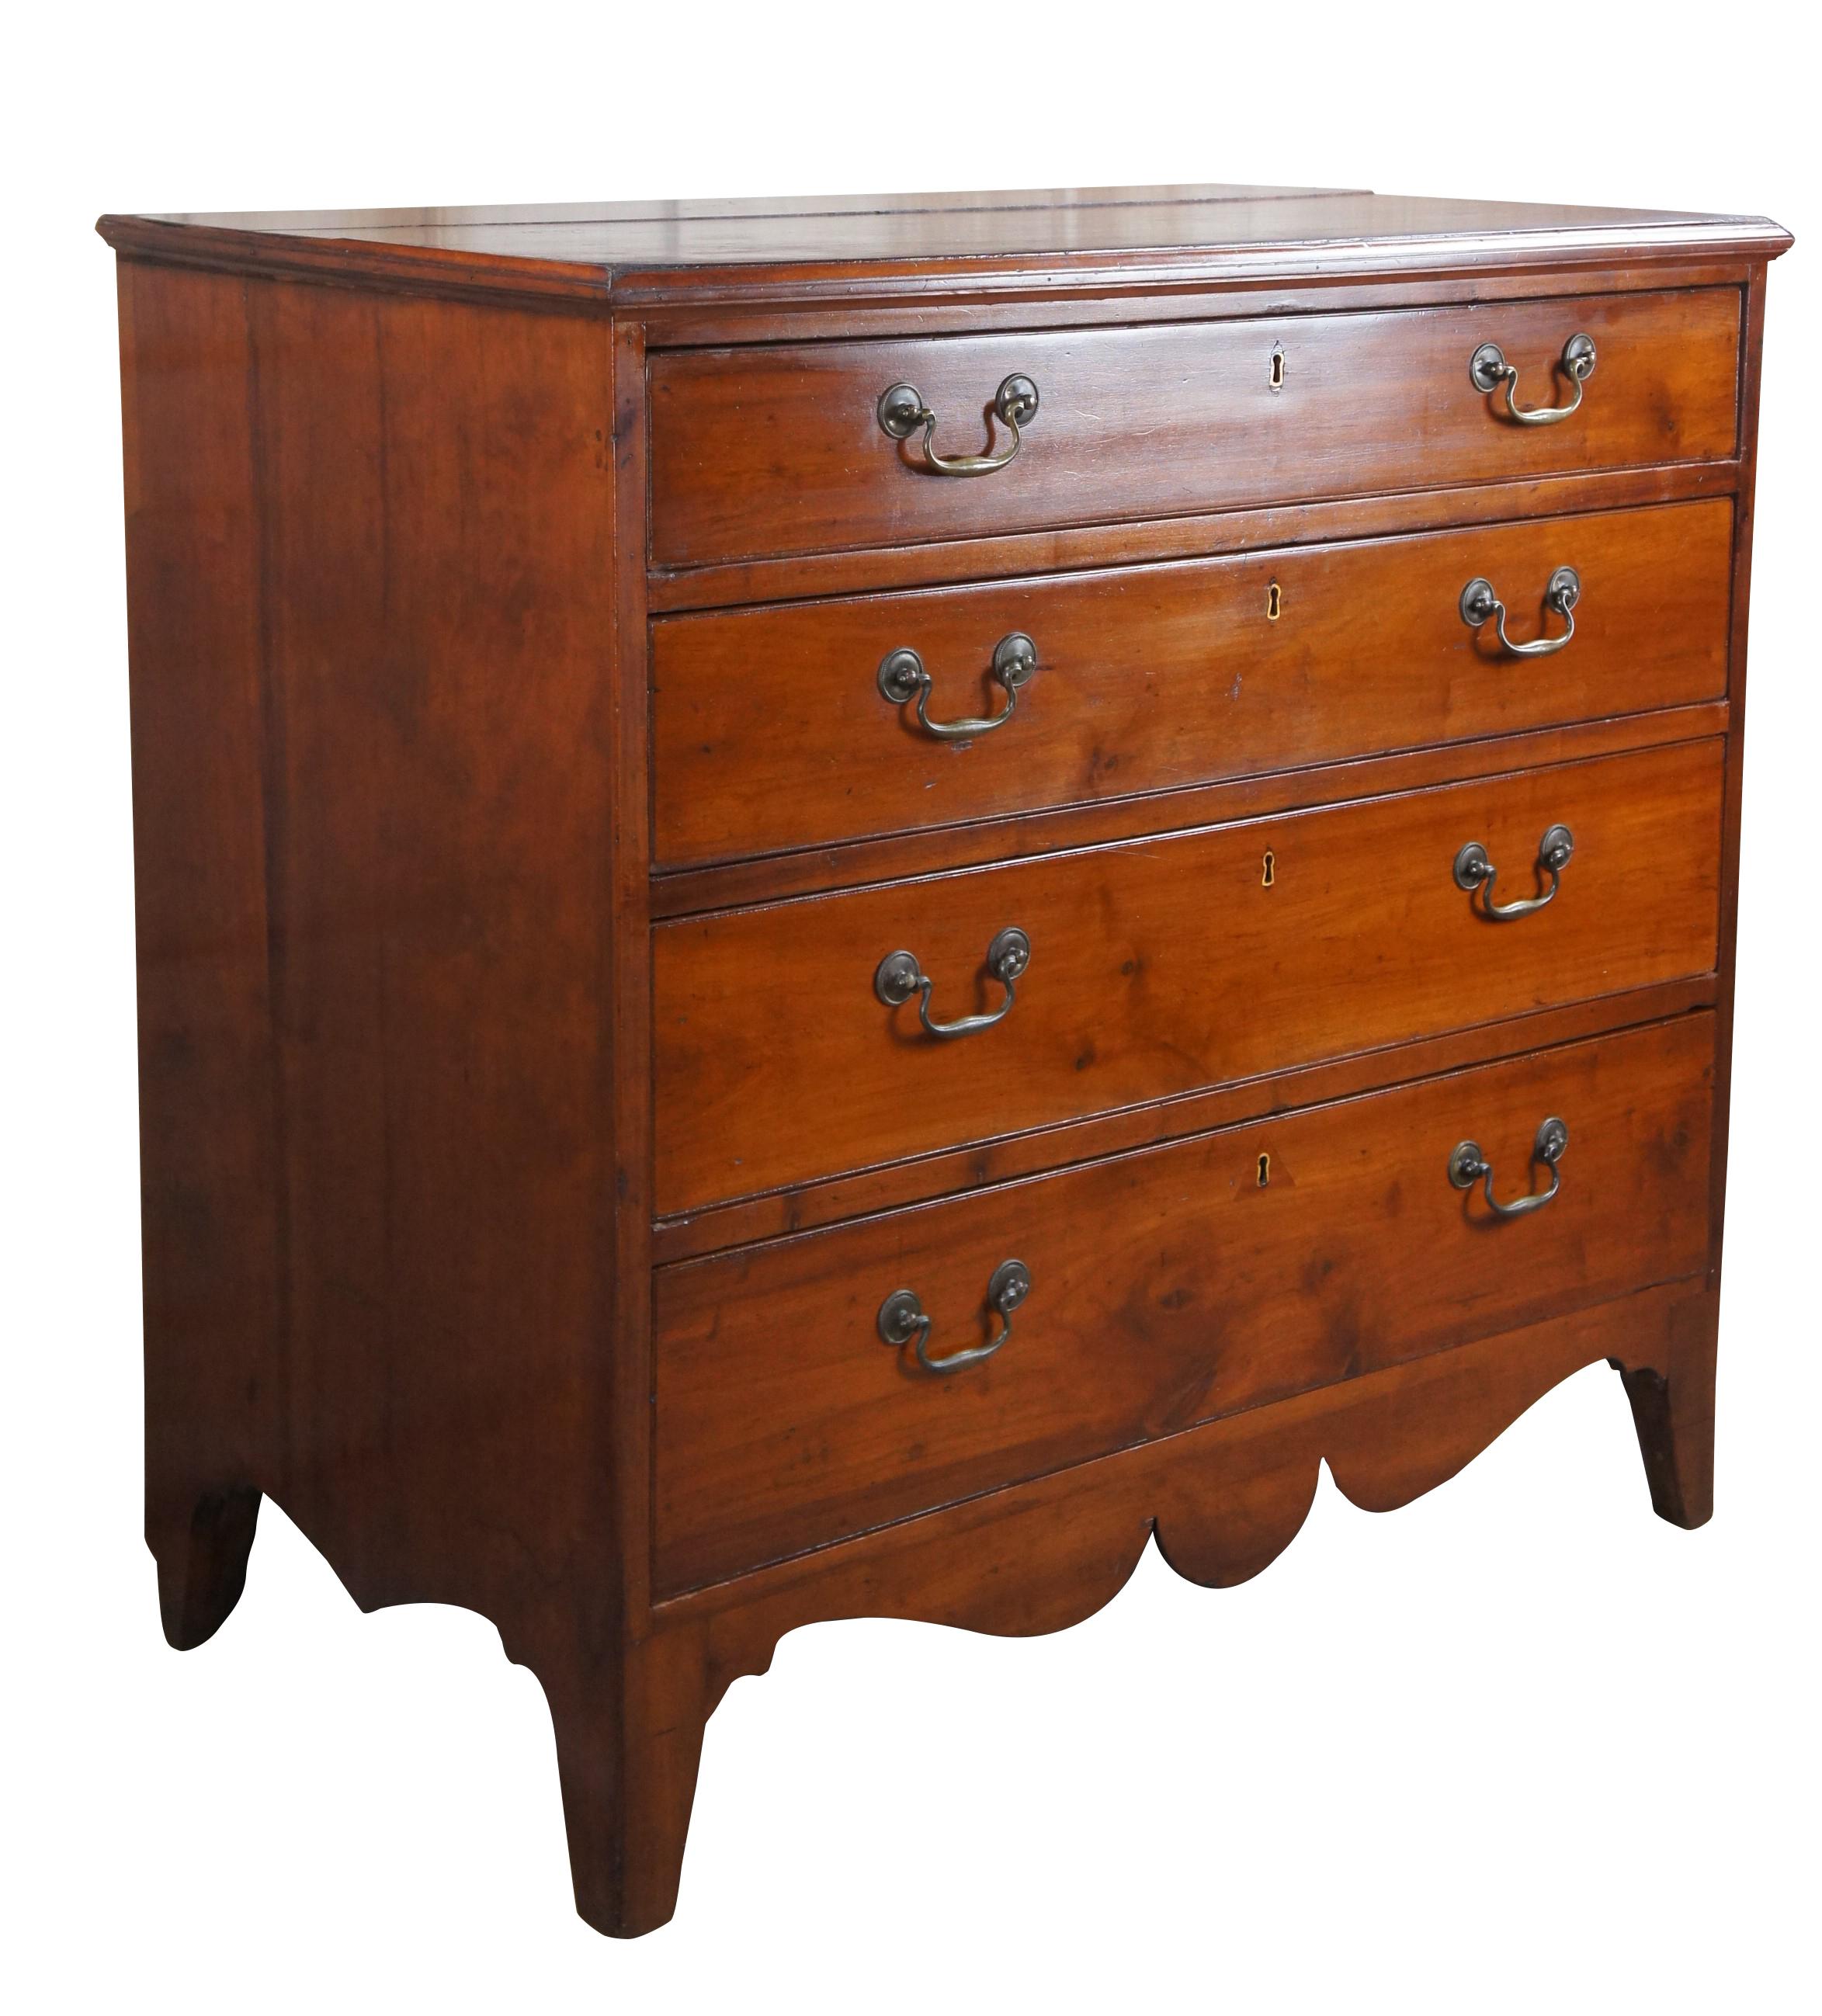 An impressive Federal Period dresser or chest of drawers, circa 1820s.  Made of American cherry featuring four graduated hand dovetailed cock beaded drawers with colonial brass bale pulls and brass escutcheon plates.  The rectangular frame is